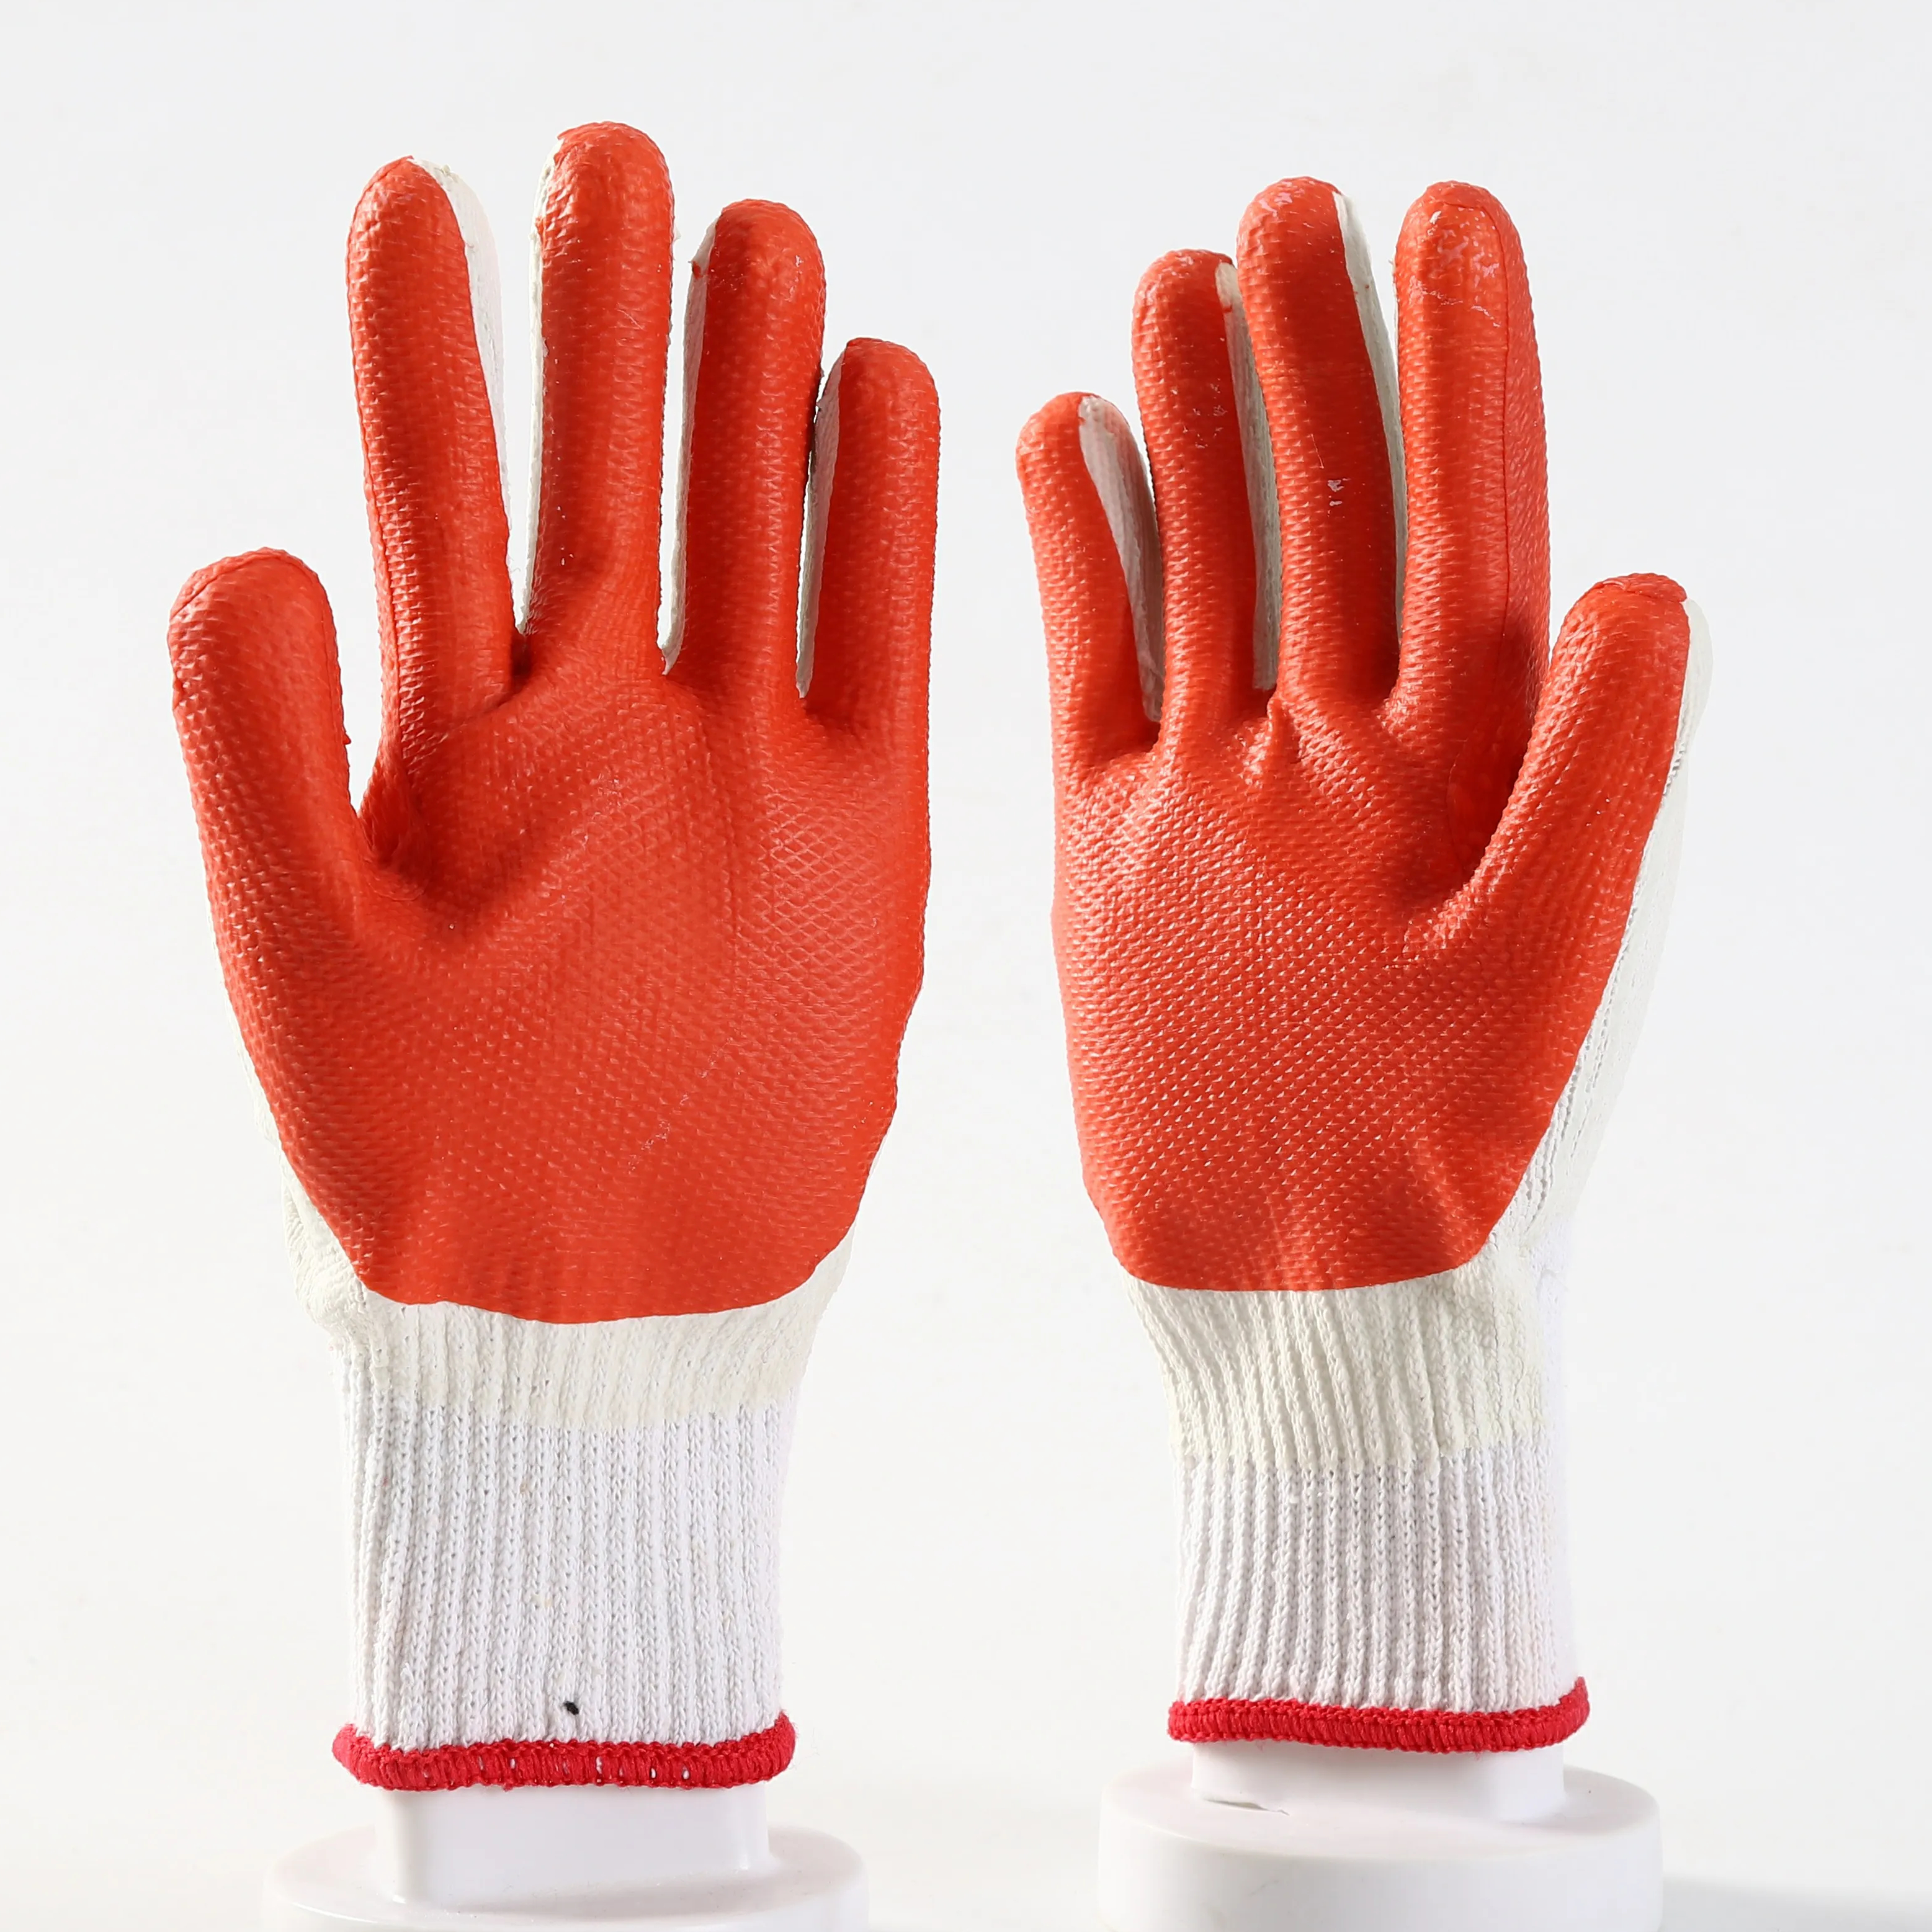 Rubber laminated poly/cotton gloves anti-slip latex rubber coated safety gloves for construction